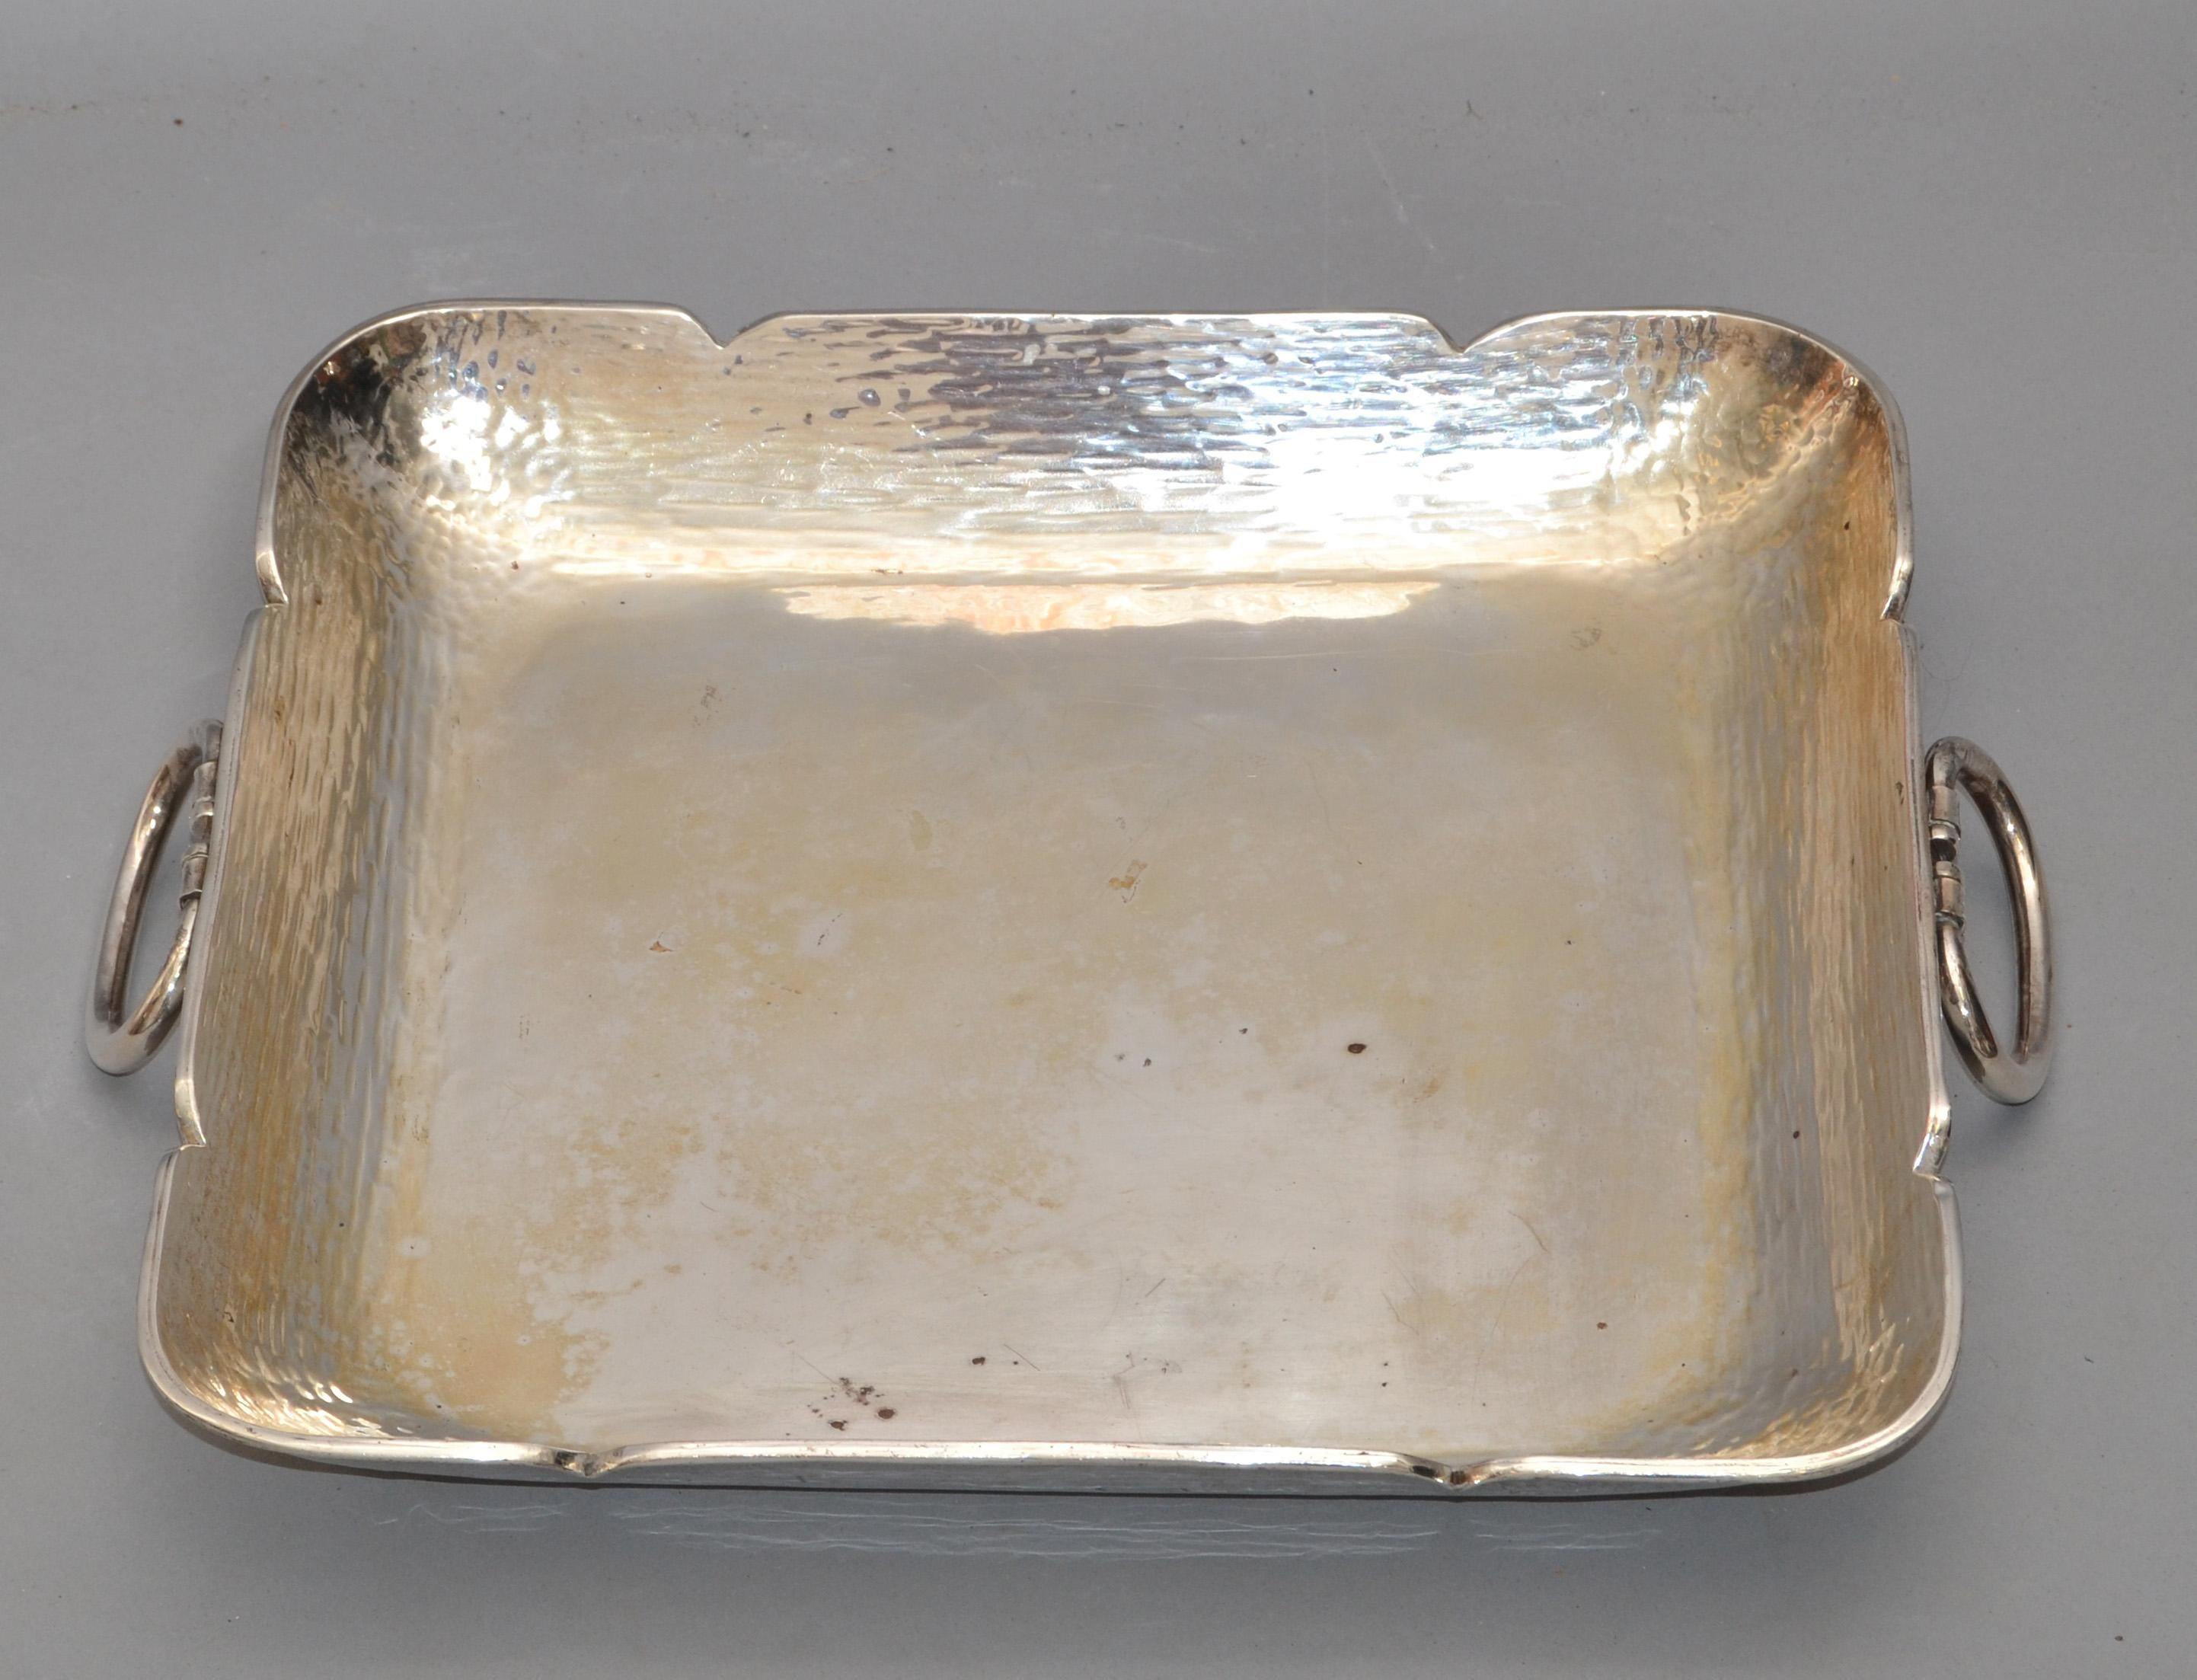 1970s Serving Tray Handles Silver Plated Hammered Steel Mid-Century Modern For Sale 5